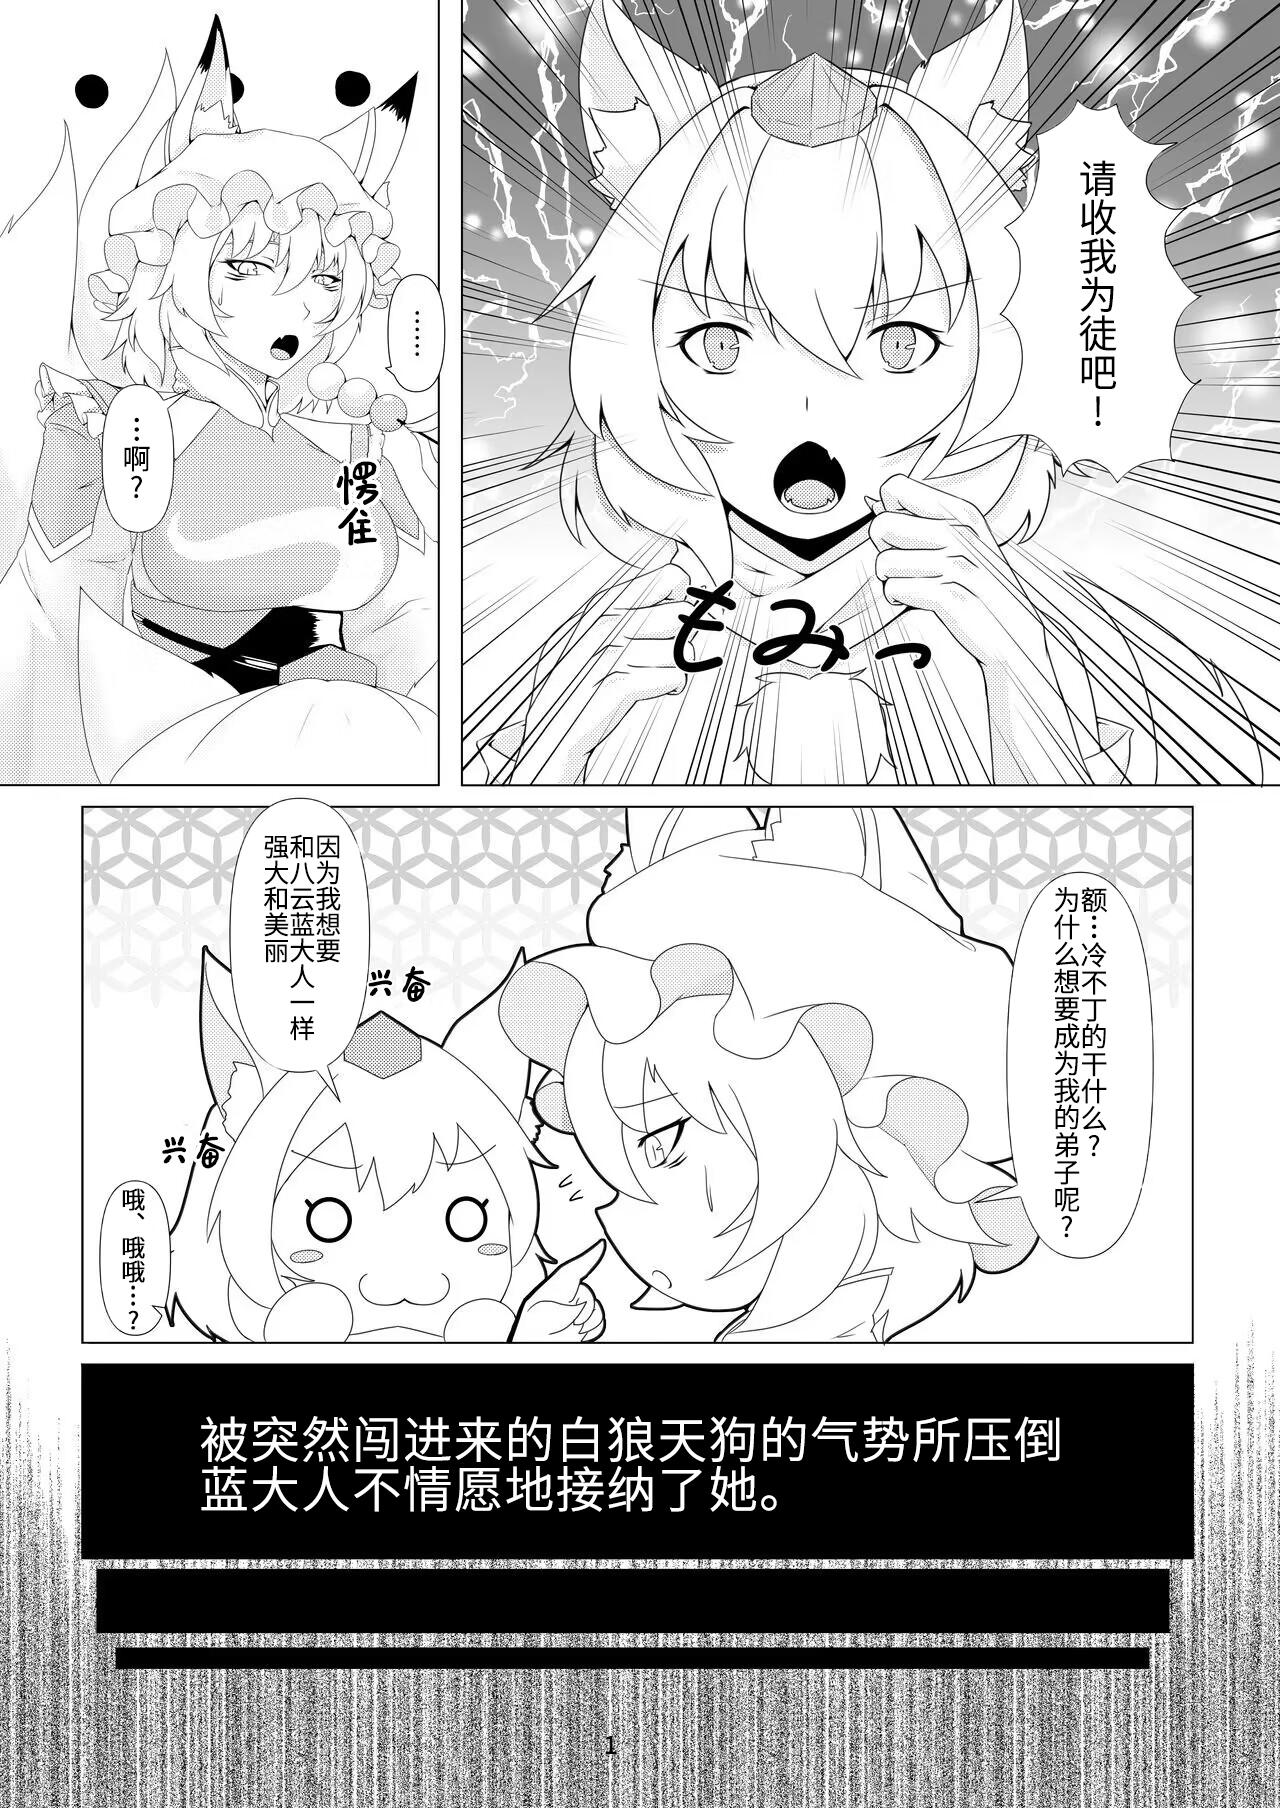 Indo Shoukei - Touhou project Penetration - Page 2